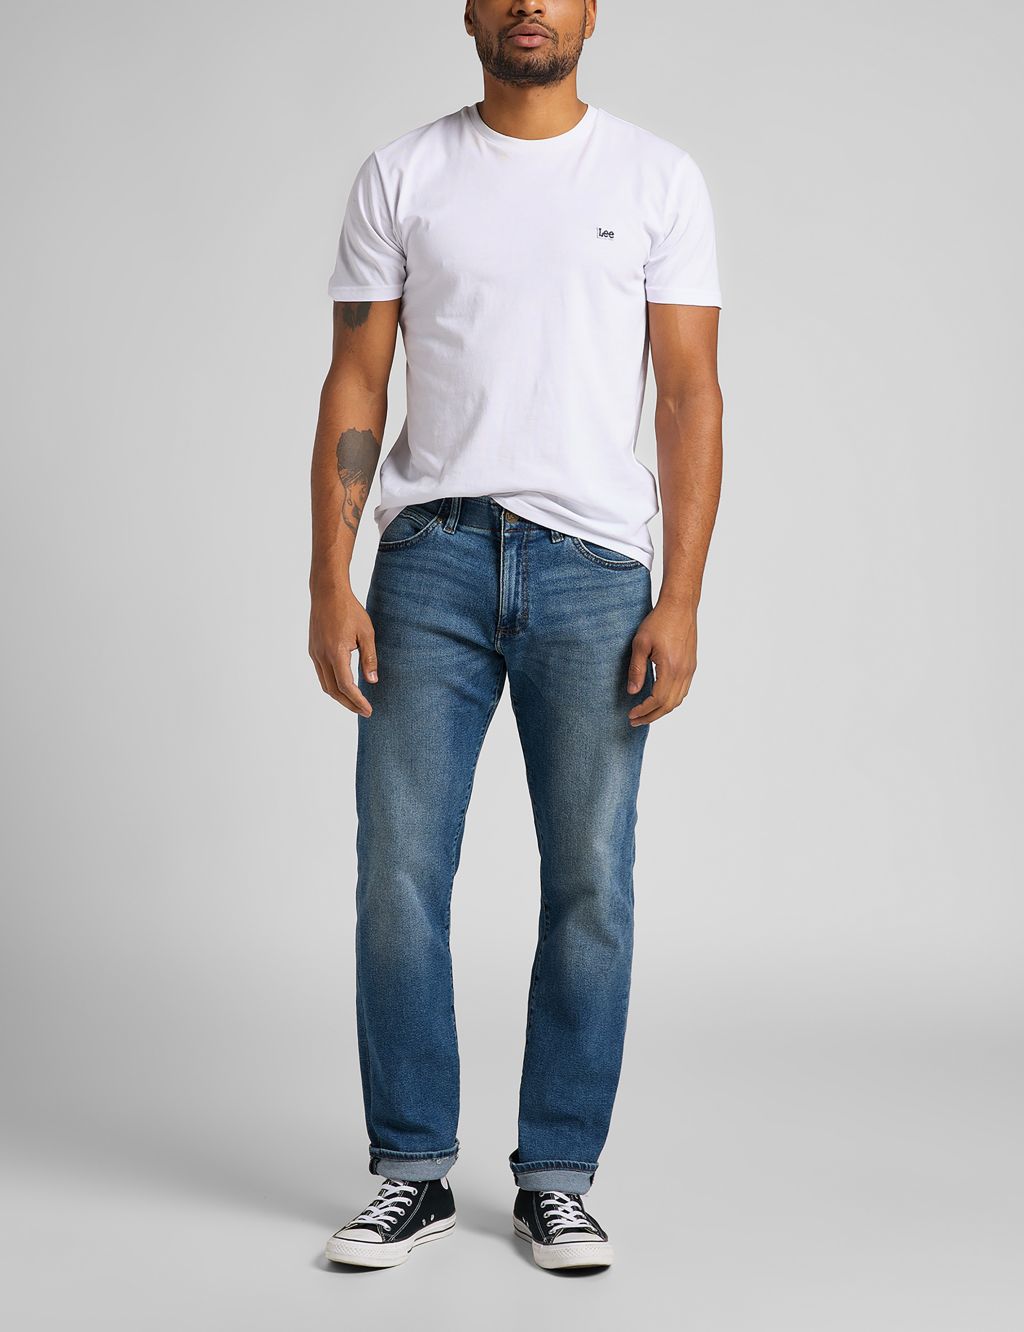 Straight Fit XM 5 Pocket Jeans image 4